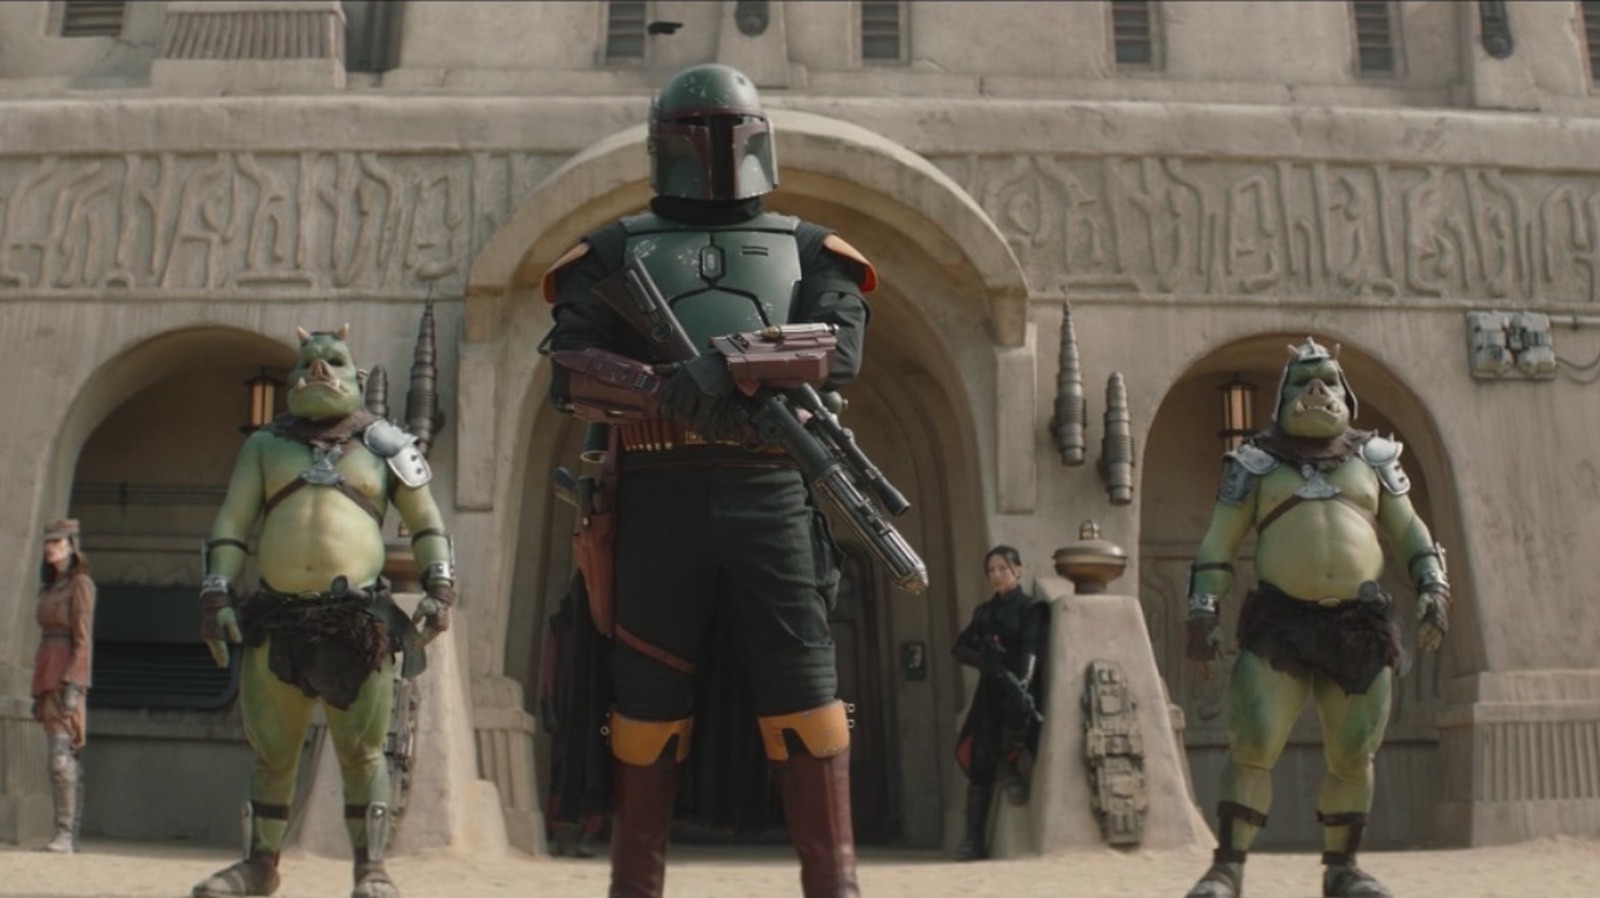 NFC Podcast Breaks Down Chapters 1 & 2 of ‘The Book of Boba Fett’